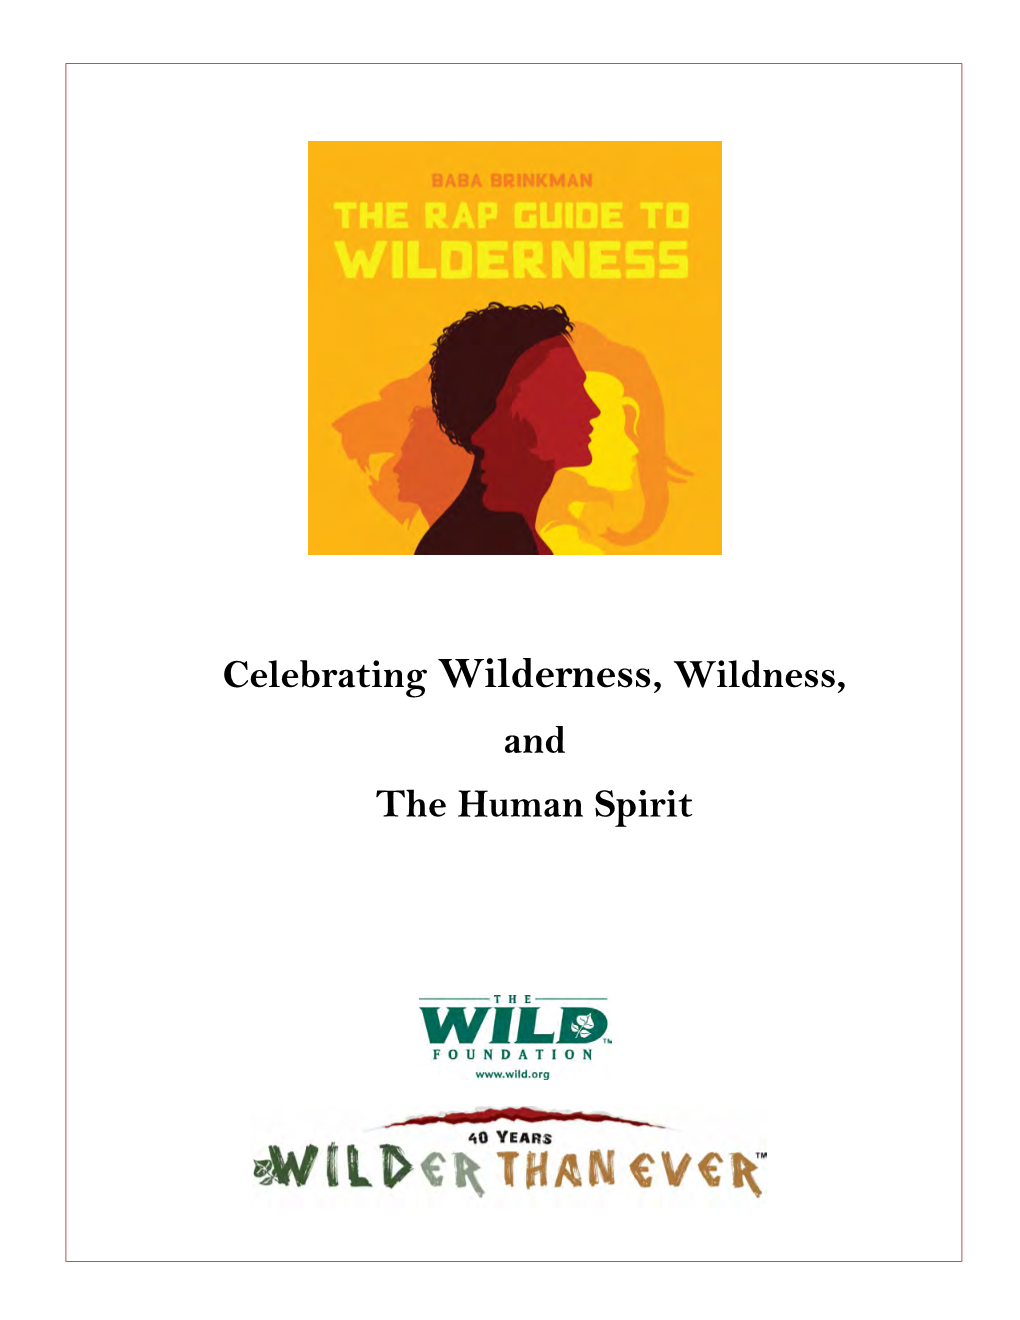 Celebrating Wilderness, Wildness, and the Human Spirit for IMMEDIATE RELEASE Contact: Michael Alexander Michael@Twoshepsthatpass.Com 646.613.1101